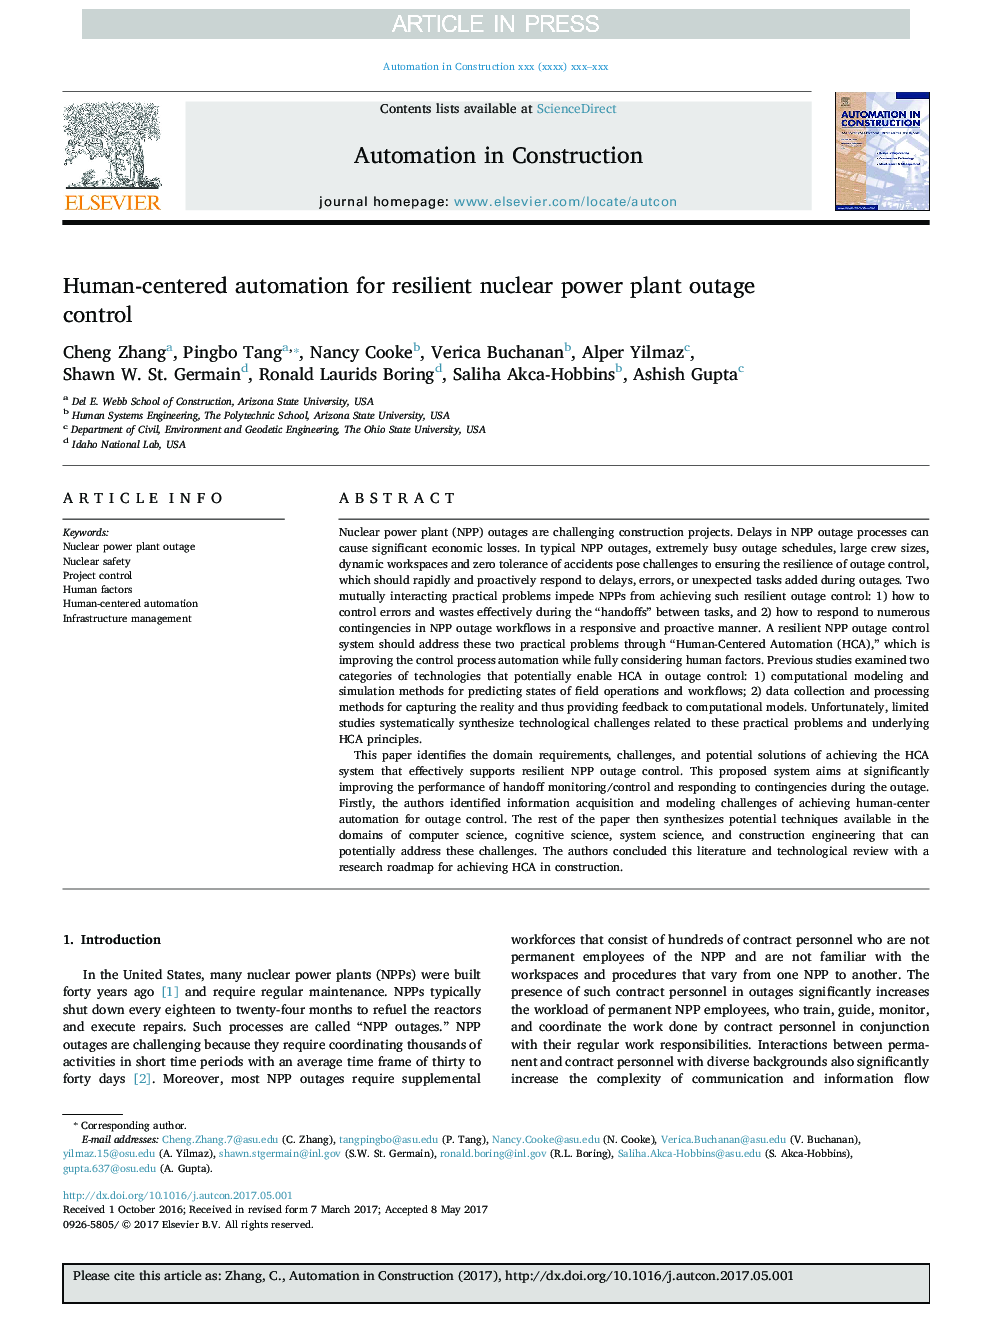 Human-centered automation for resilient nuclear power plant outage control